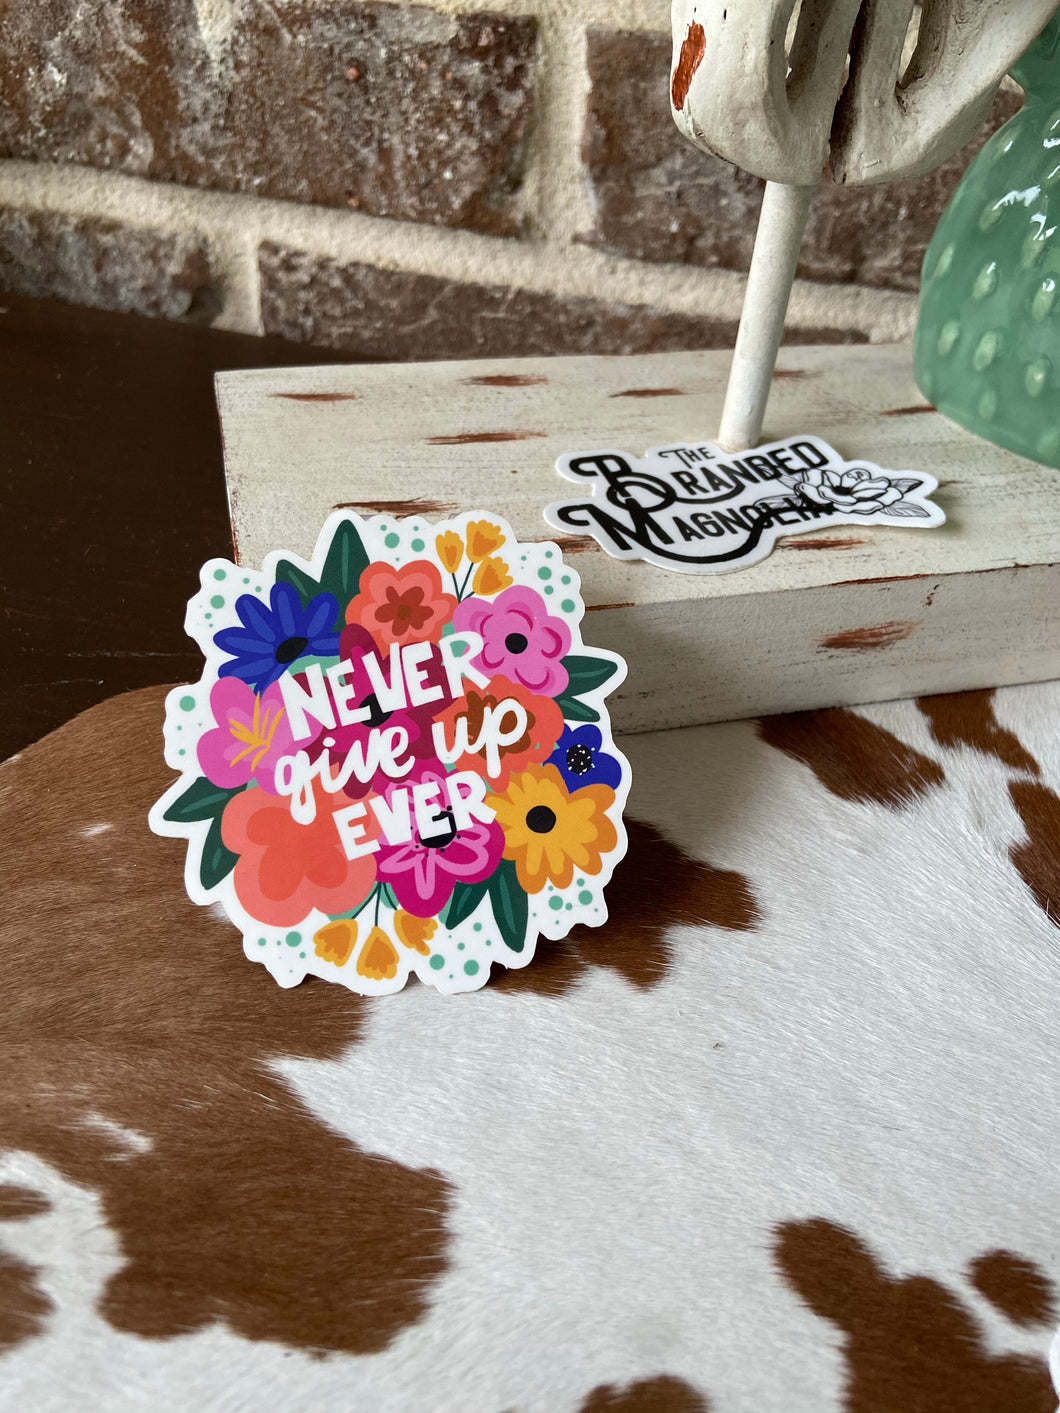 THE NEVER GIVE UP STICKER